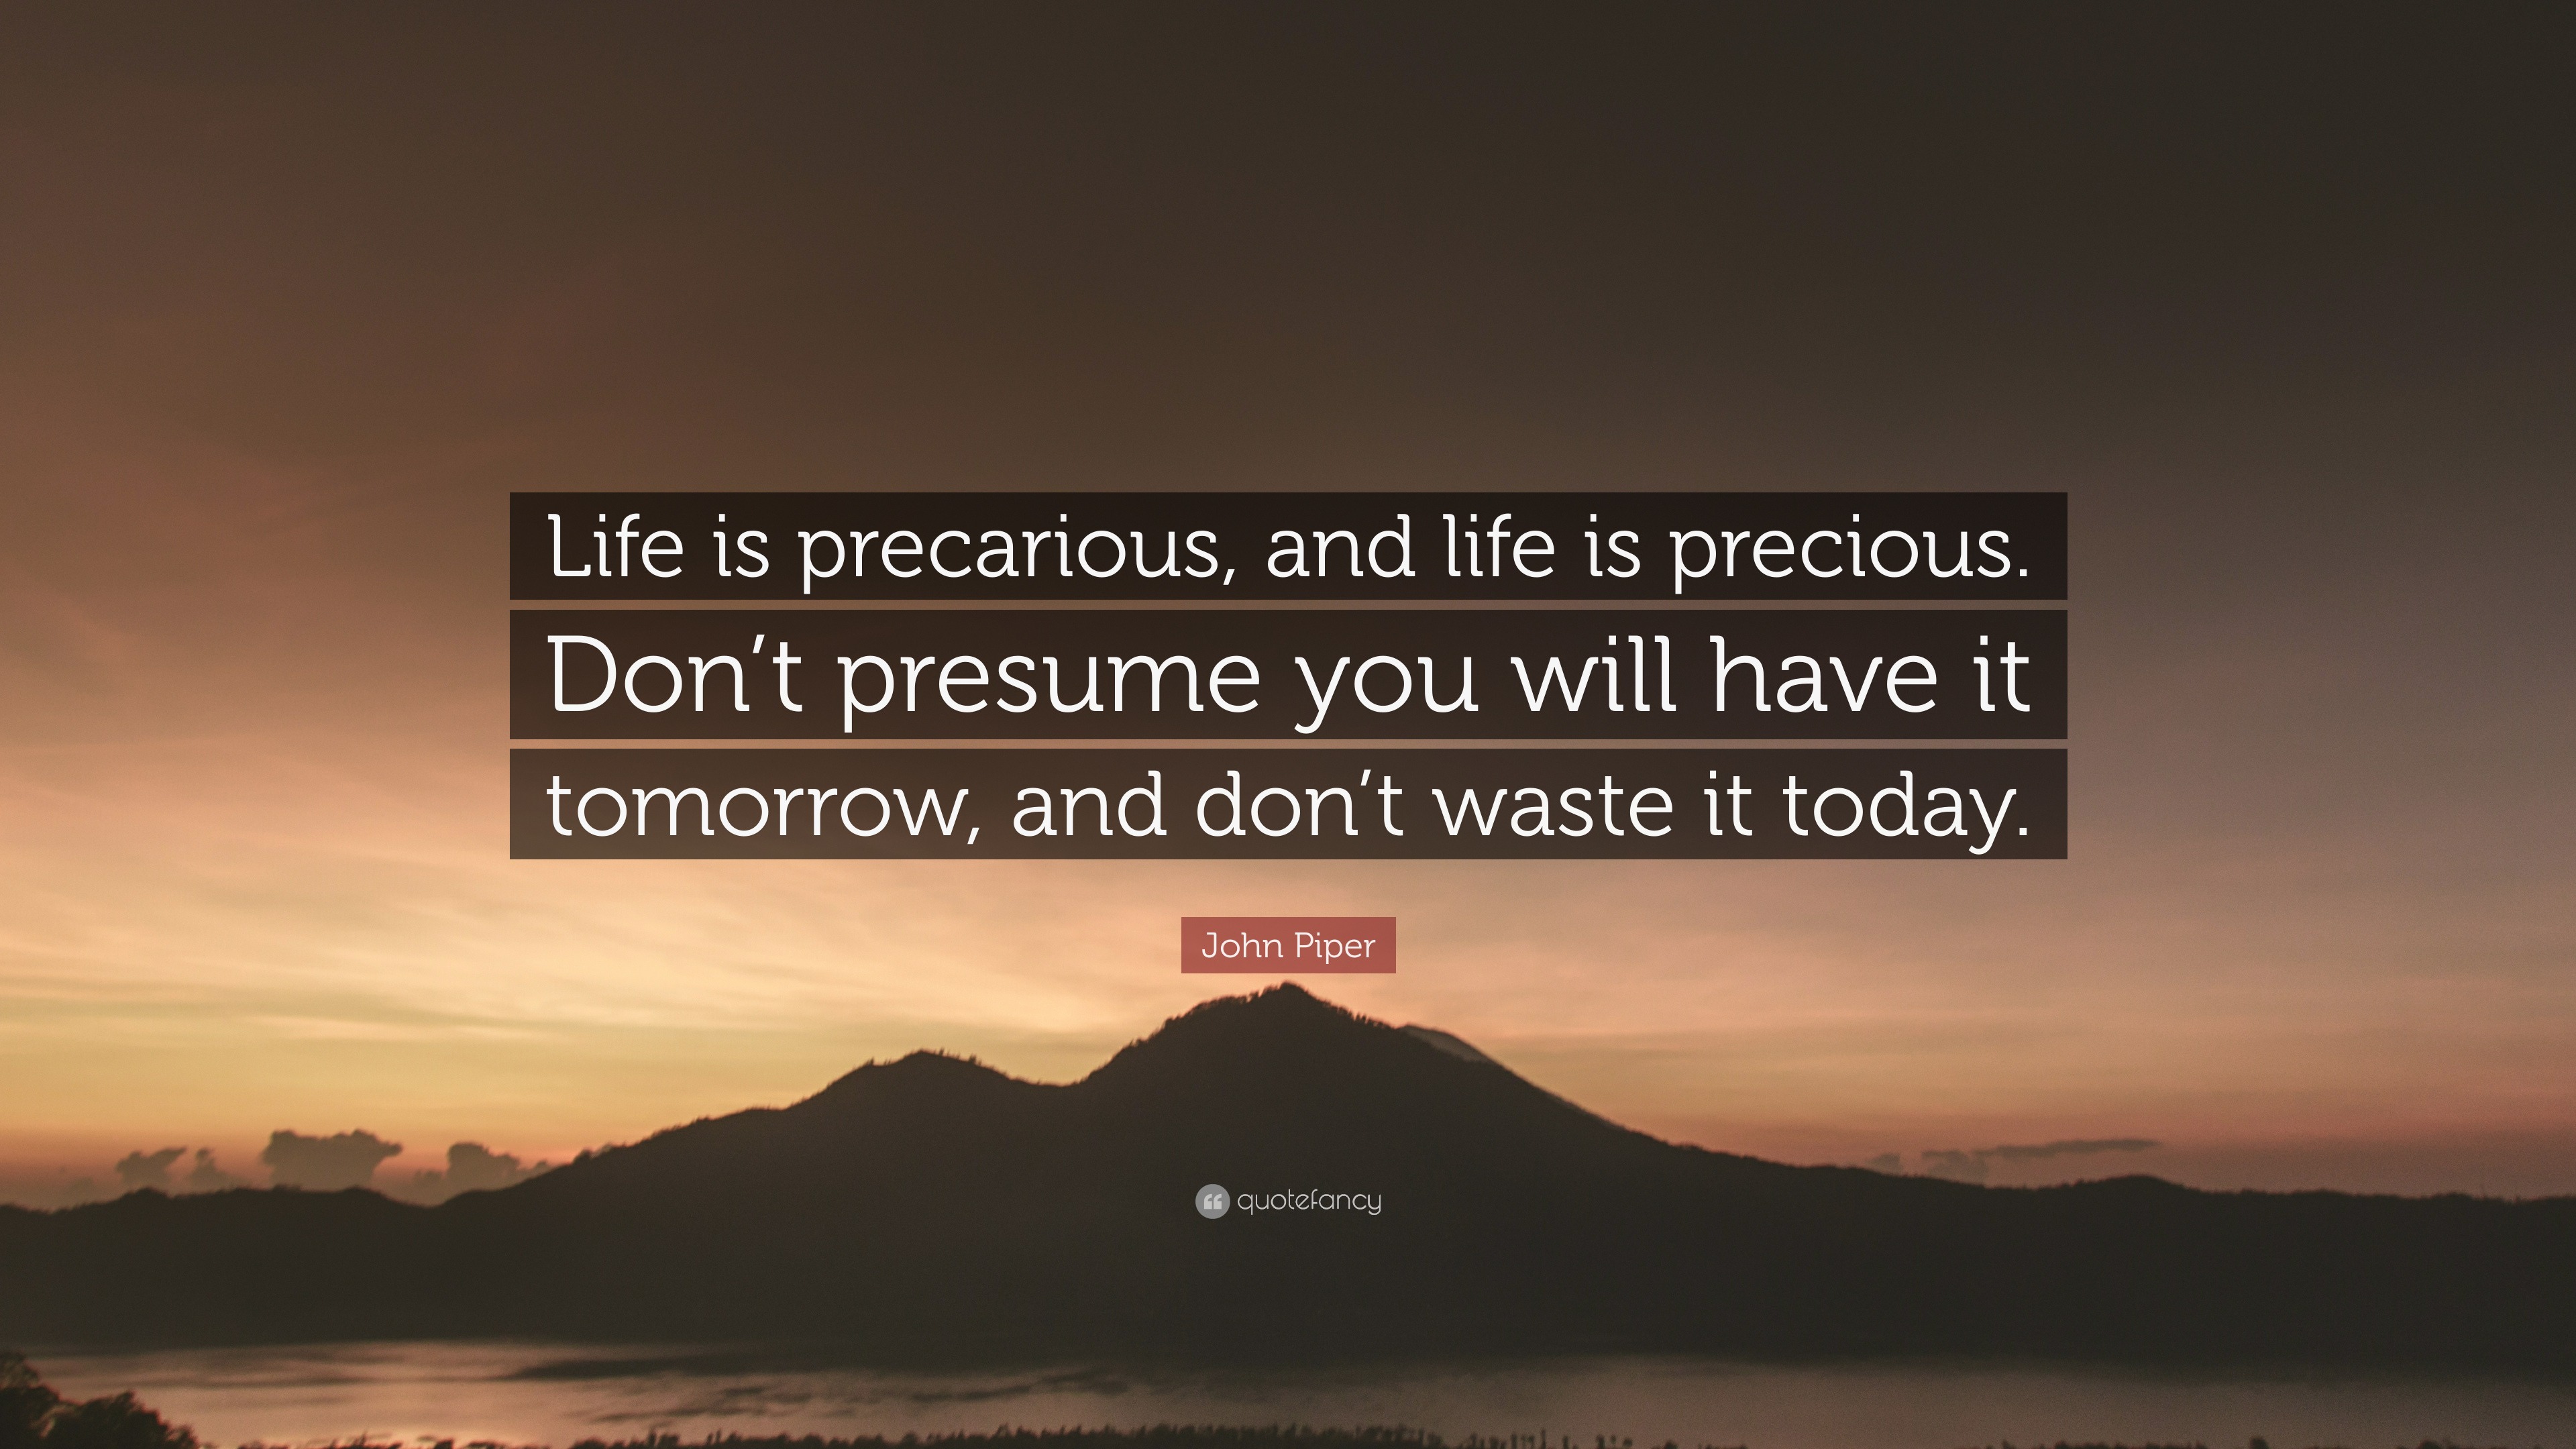 John Piper Quote: “Life is precarious, and life is precious. Don’t